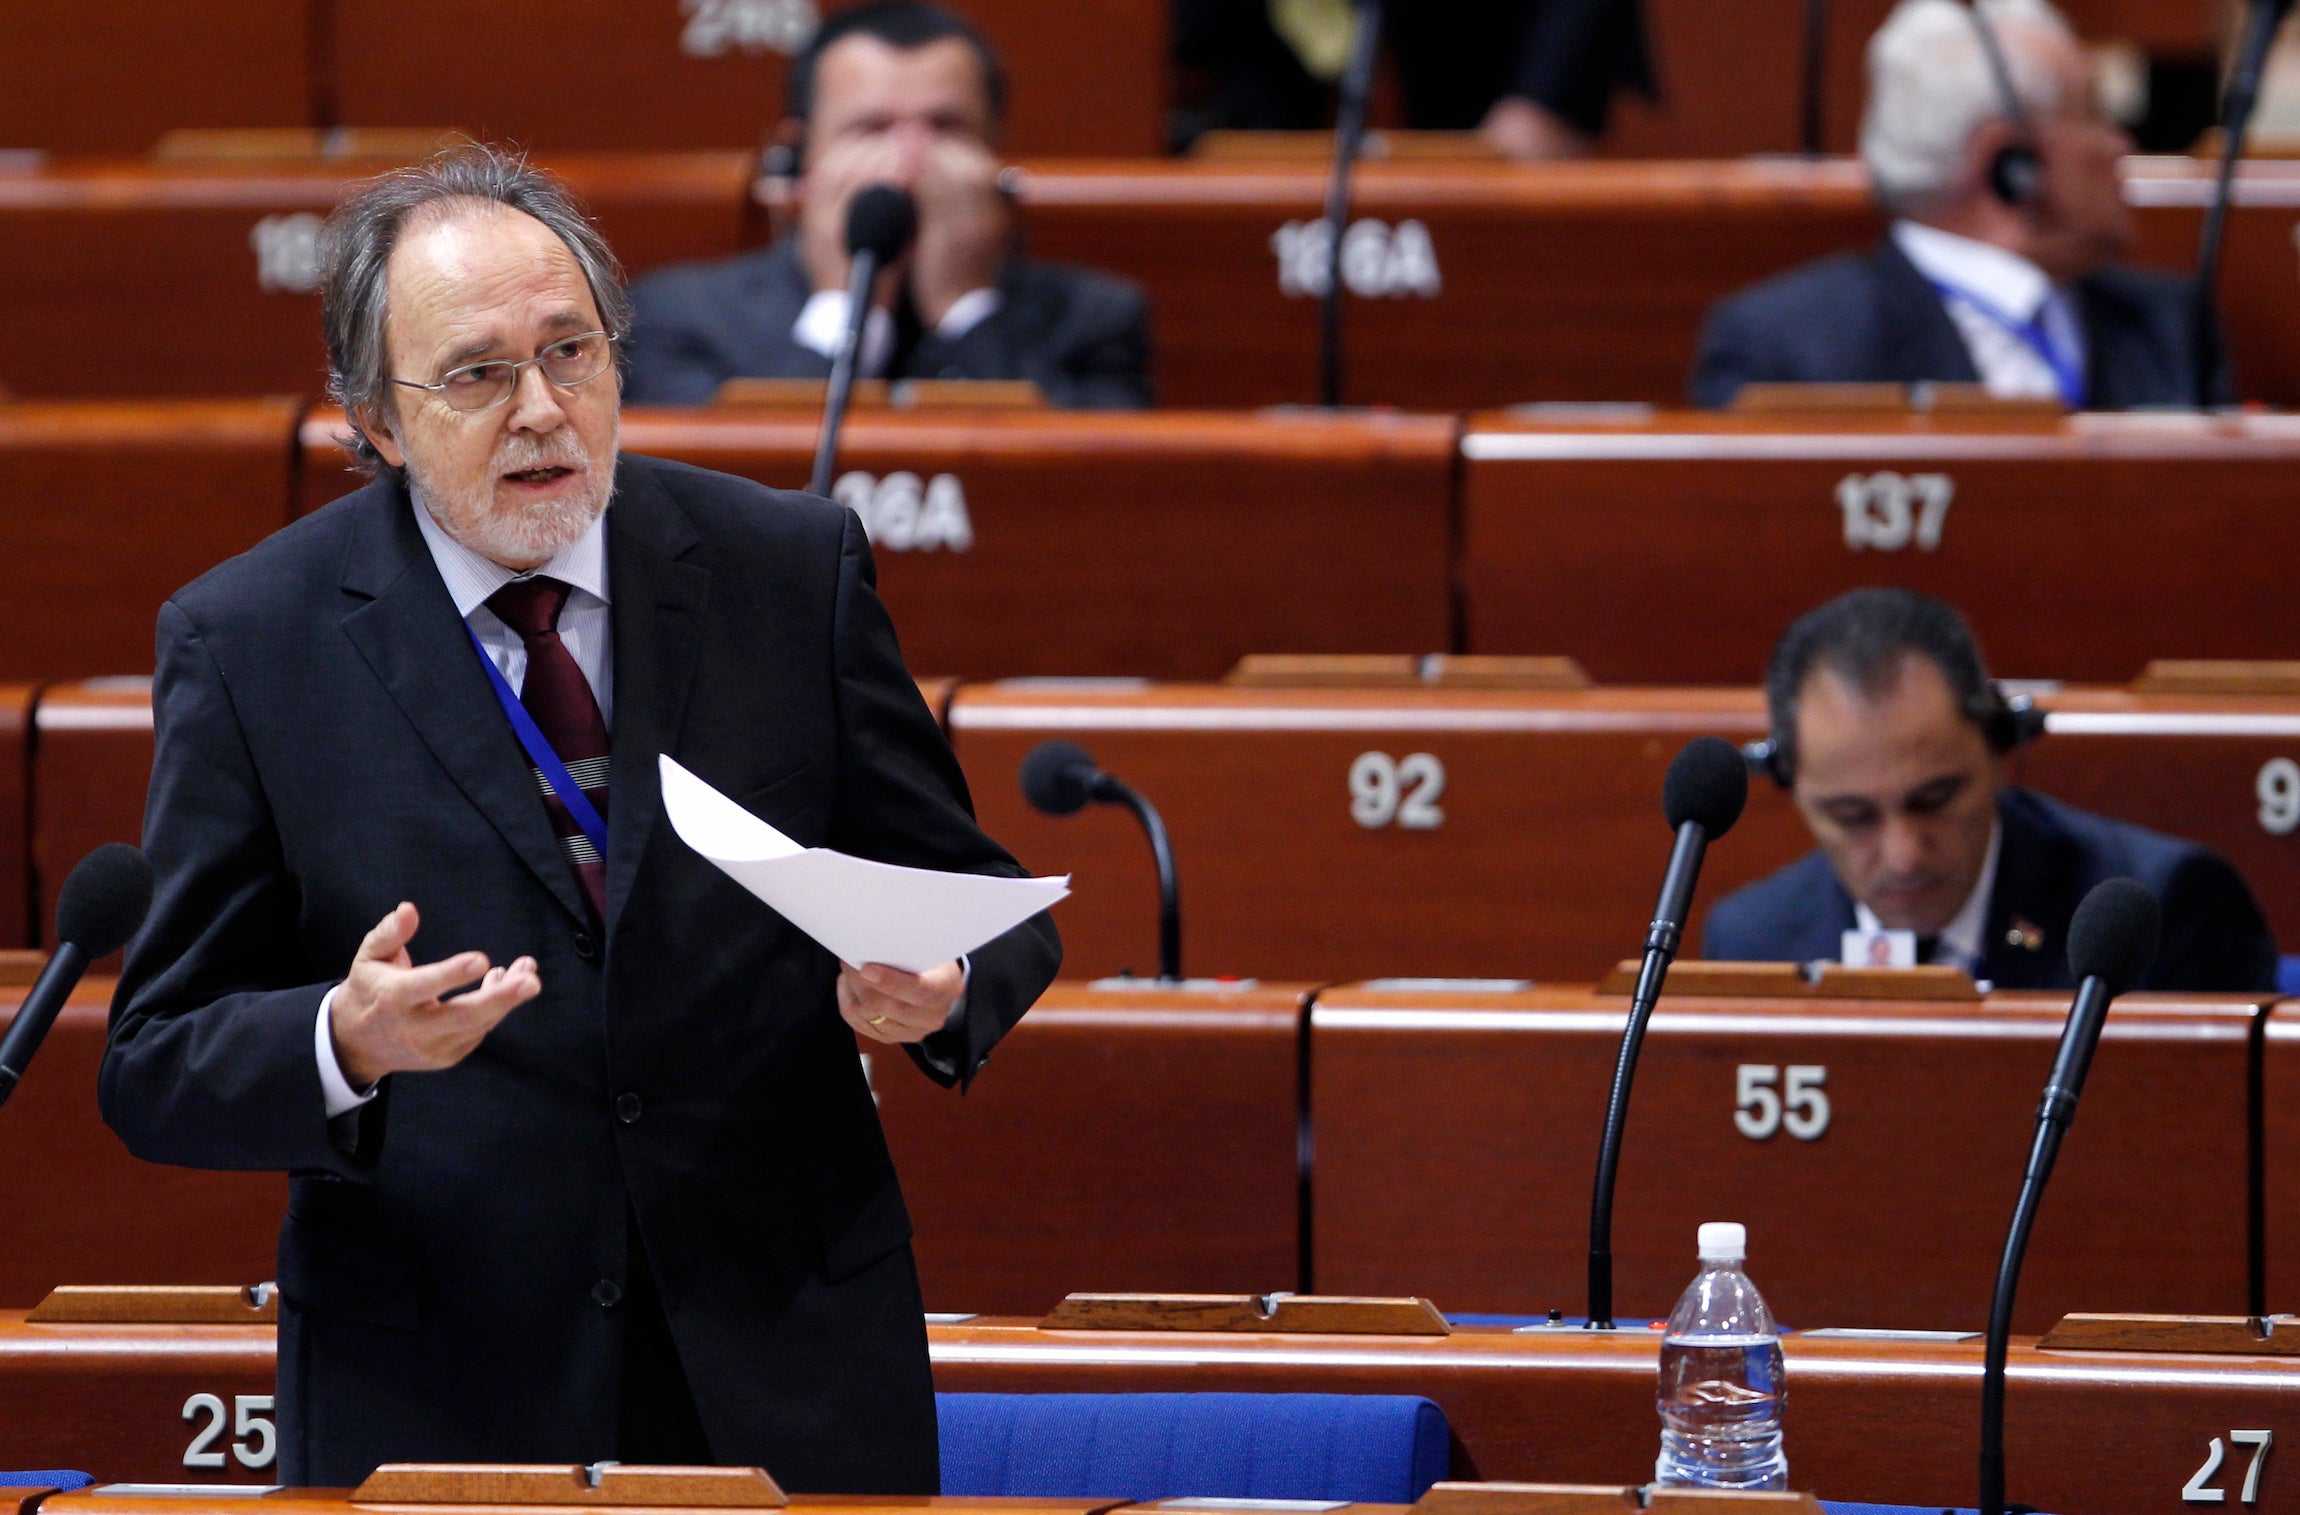 Former Council of Europe investigator Dick Marty delivers a speech at the Parliamentary Assembly of the Council of Europe in Strasbourg, October 6, 2011.